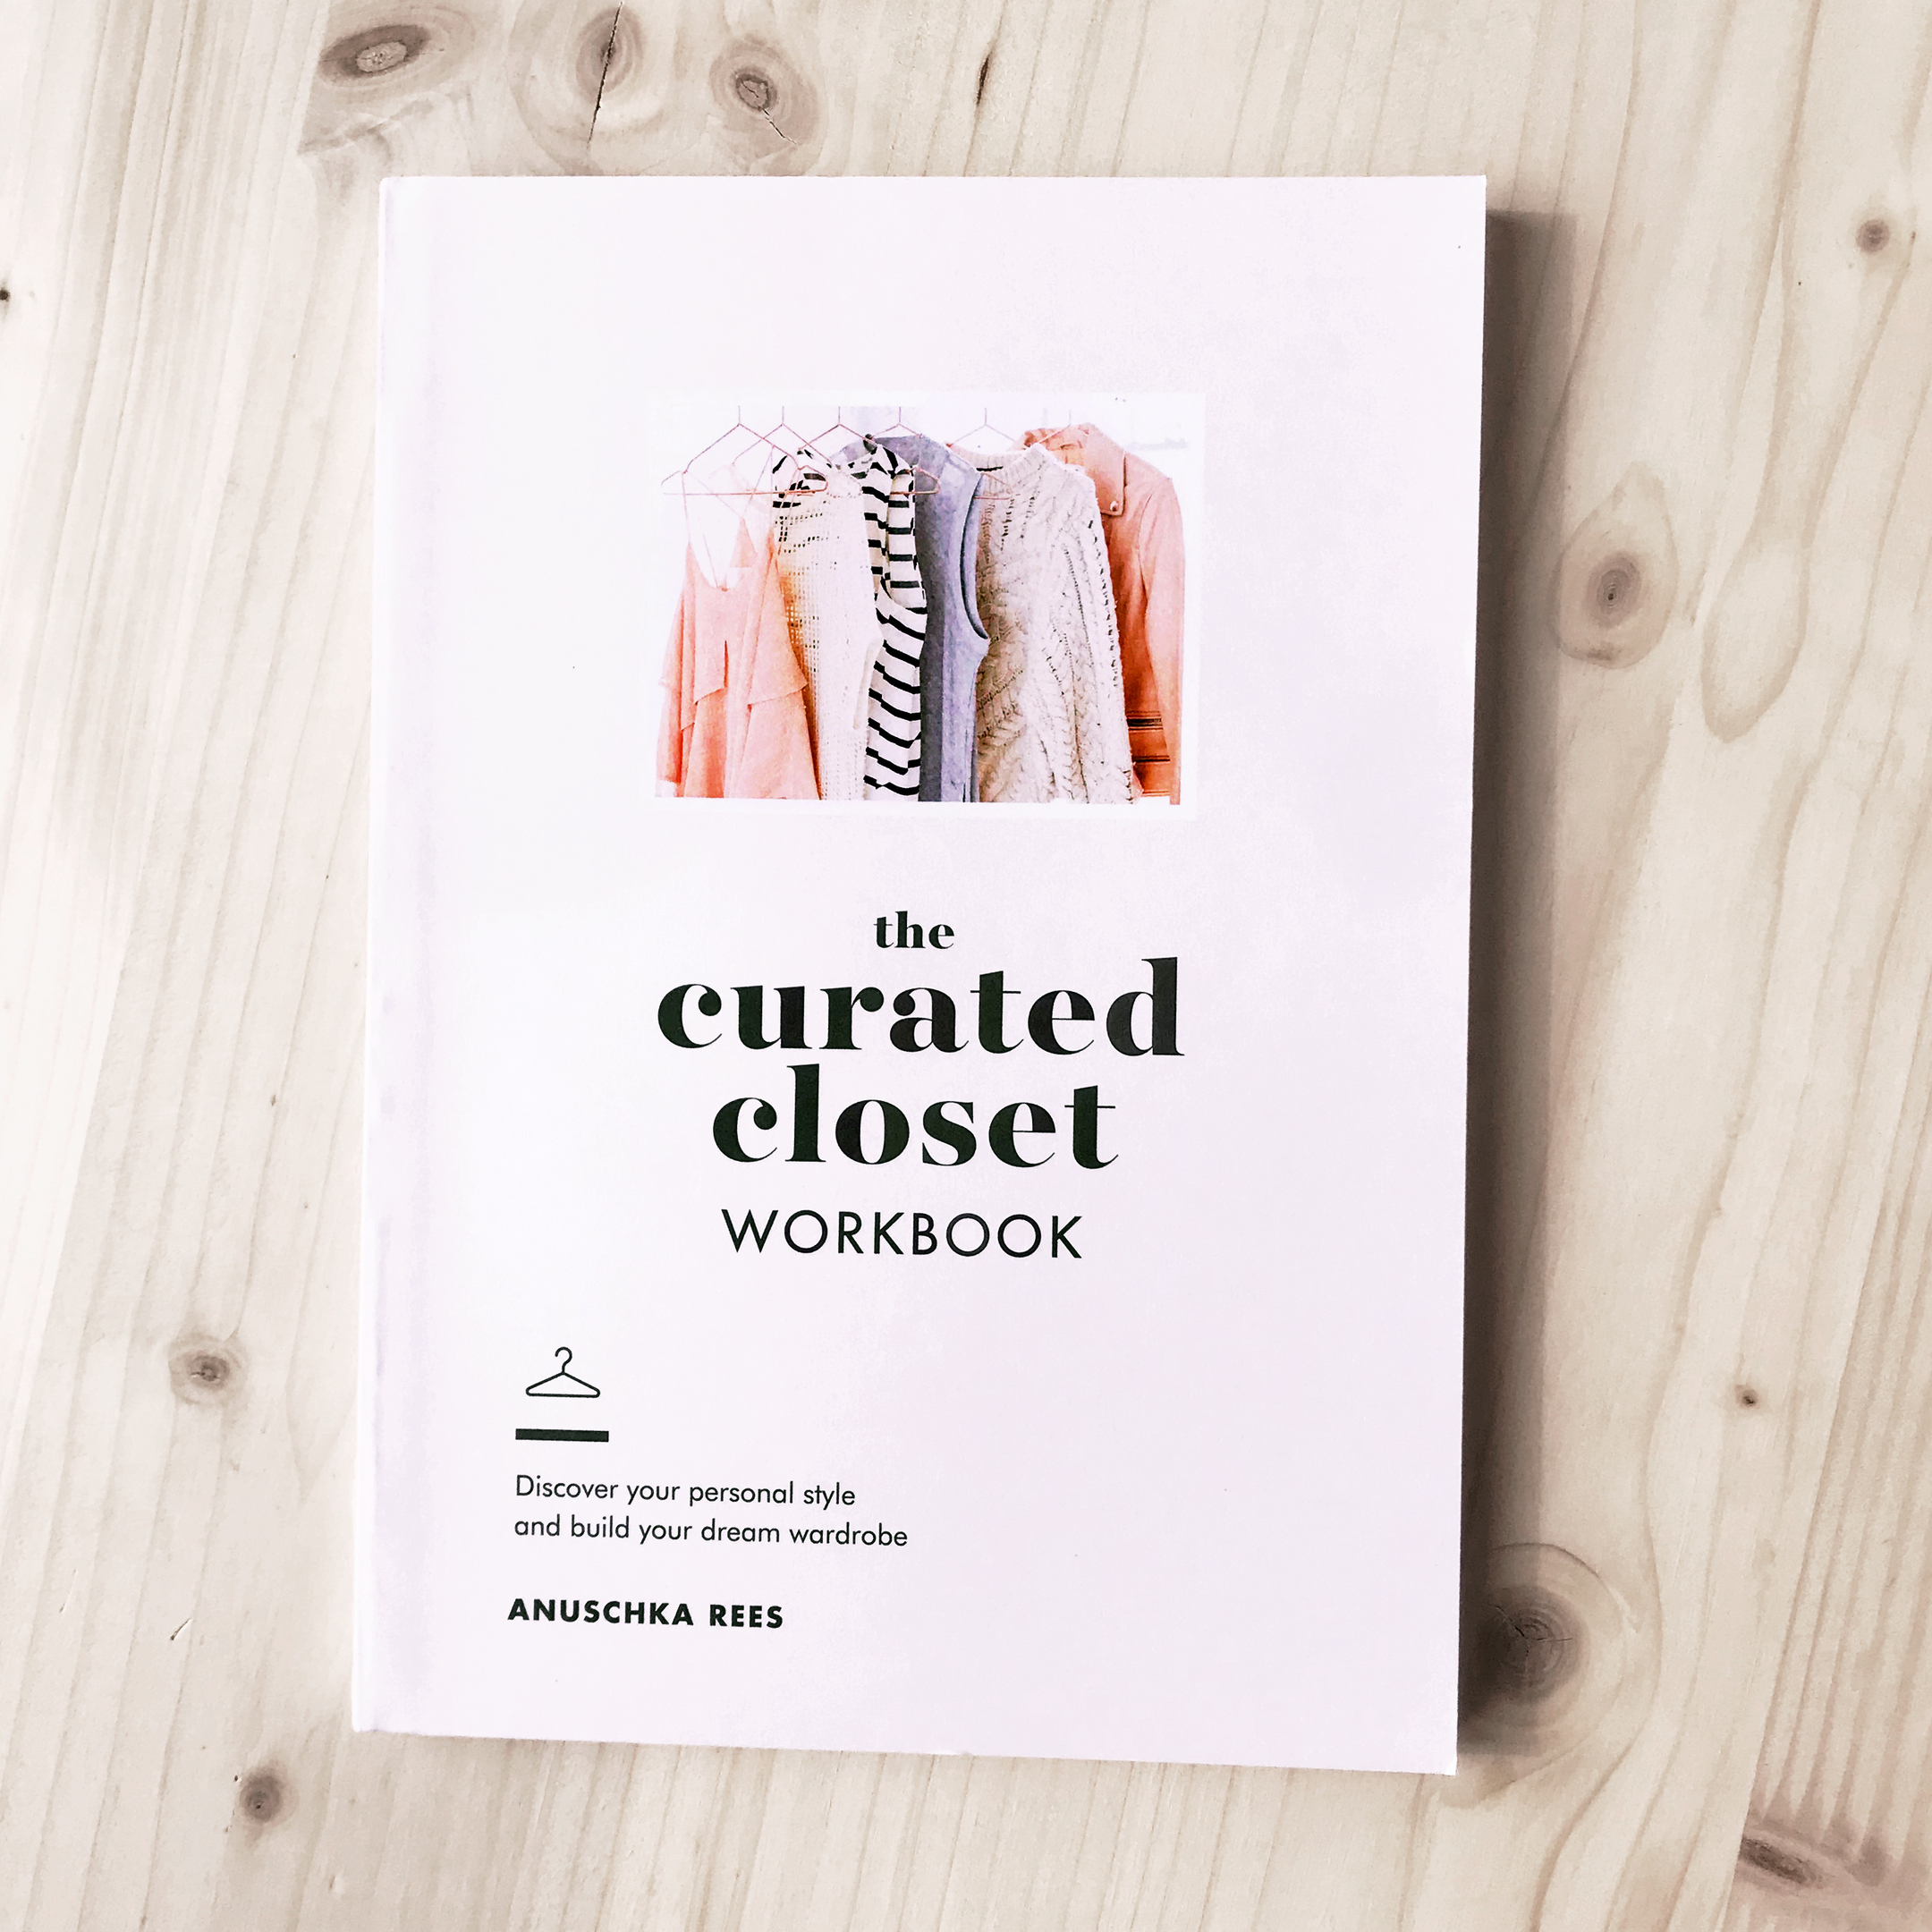 A Curated Closet (@acuratedcloset) • Instagram photos and videos